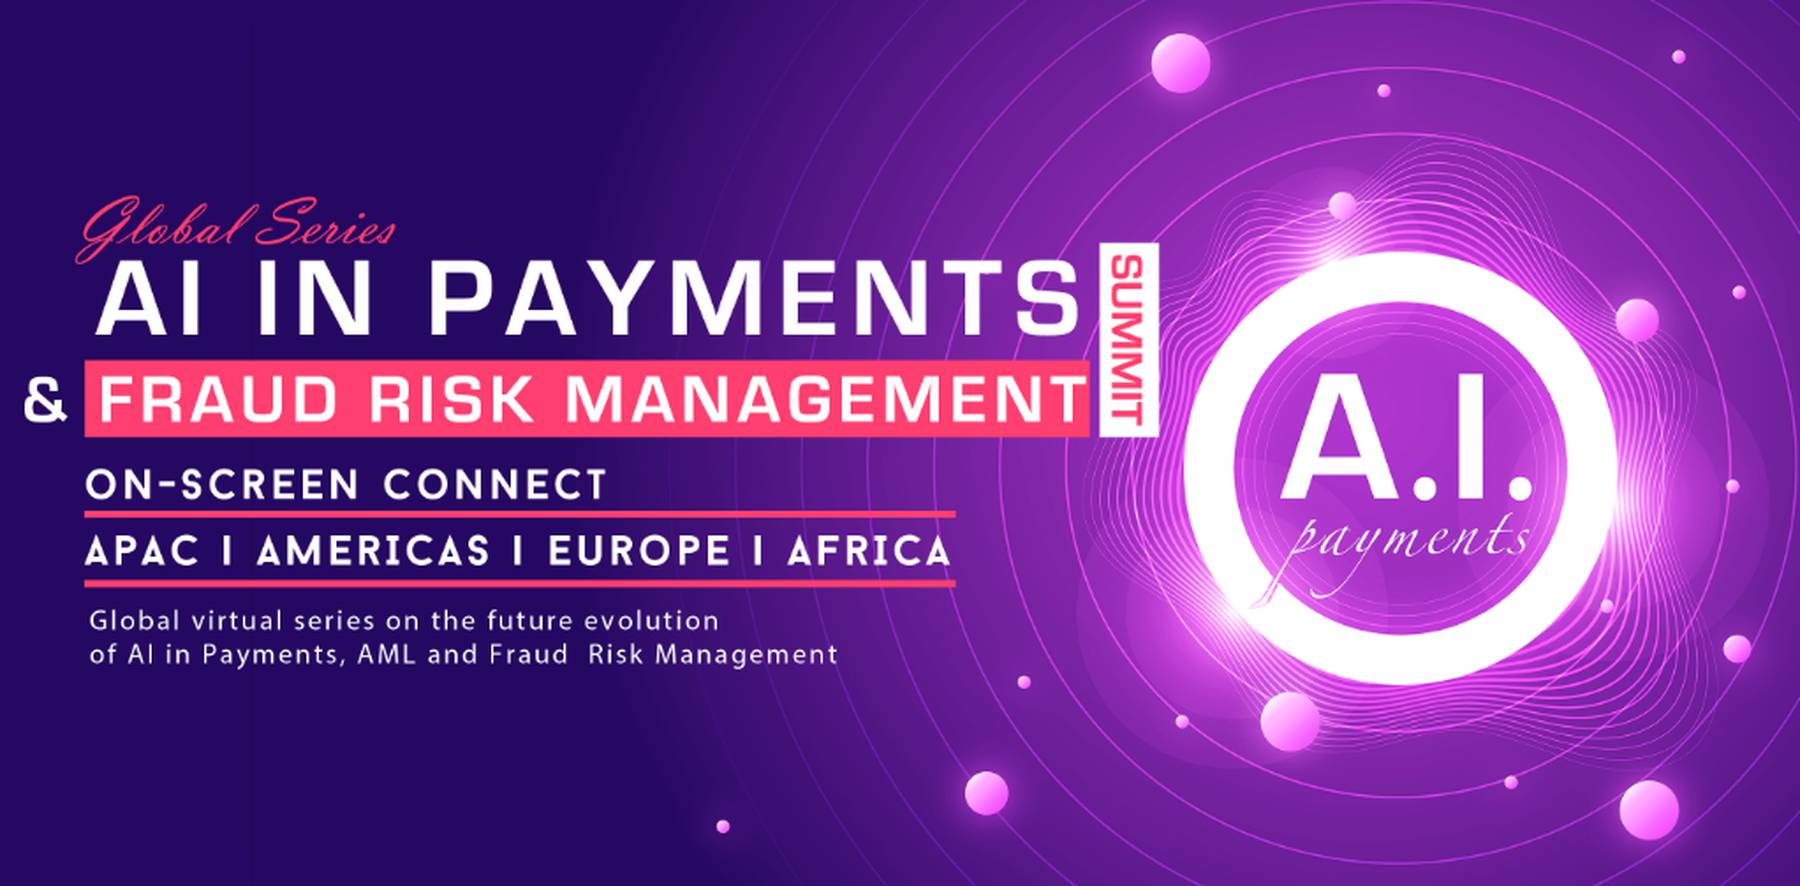 AI in Payments & Fraud Risk Management Summit APAC 2020